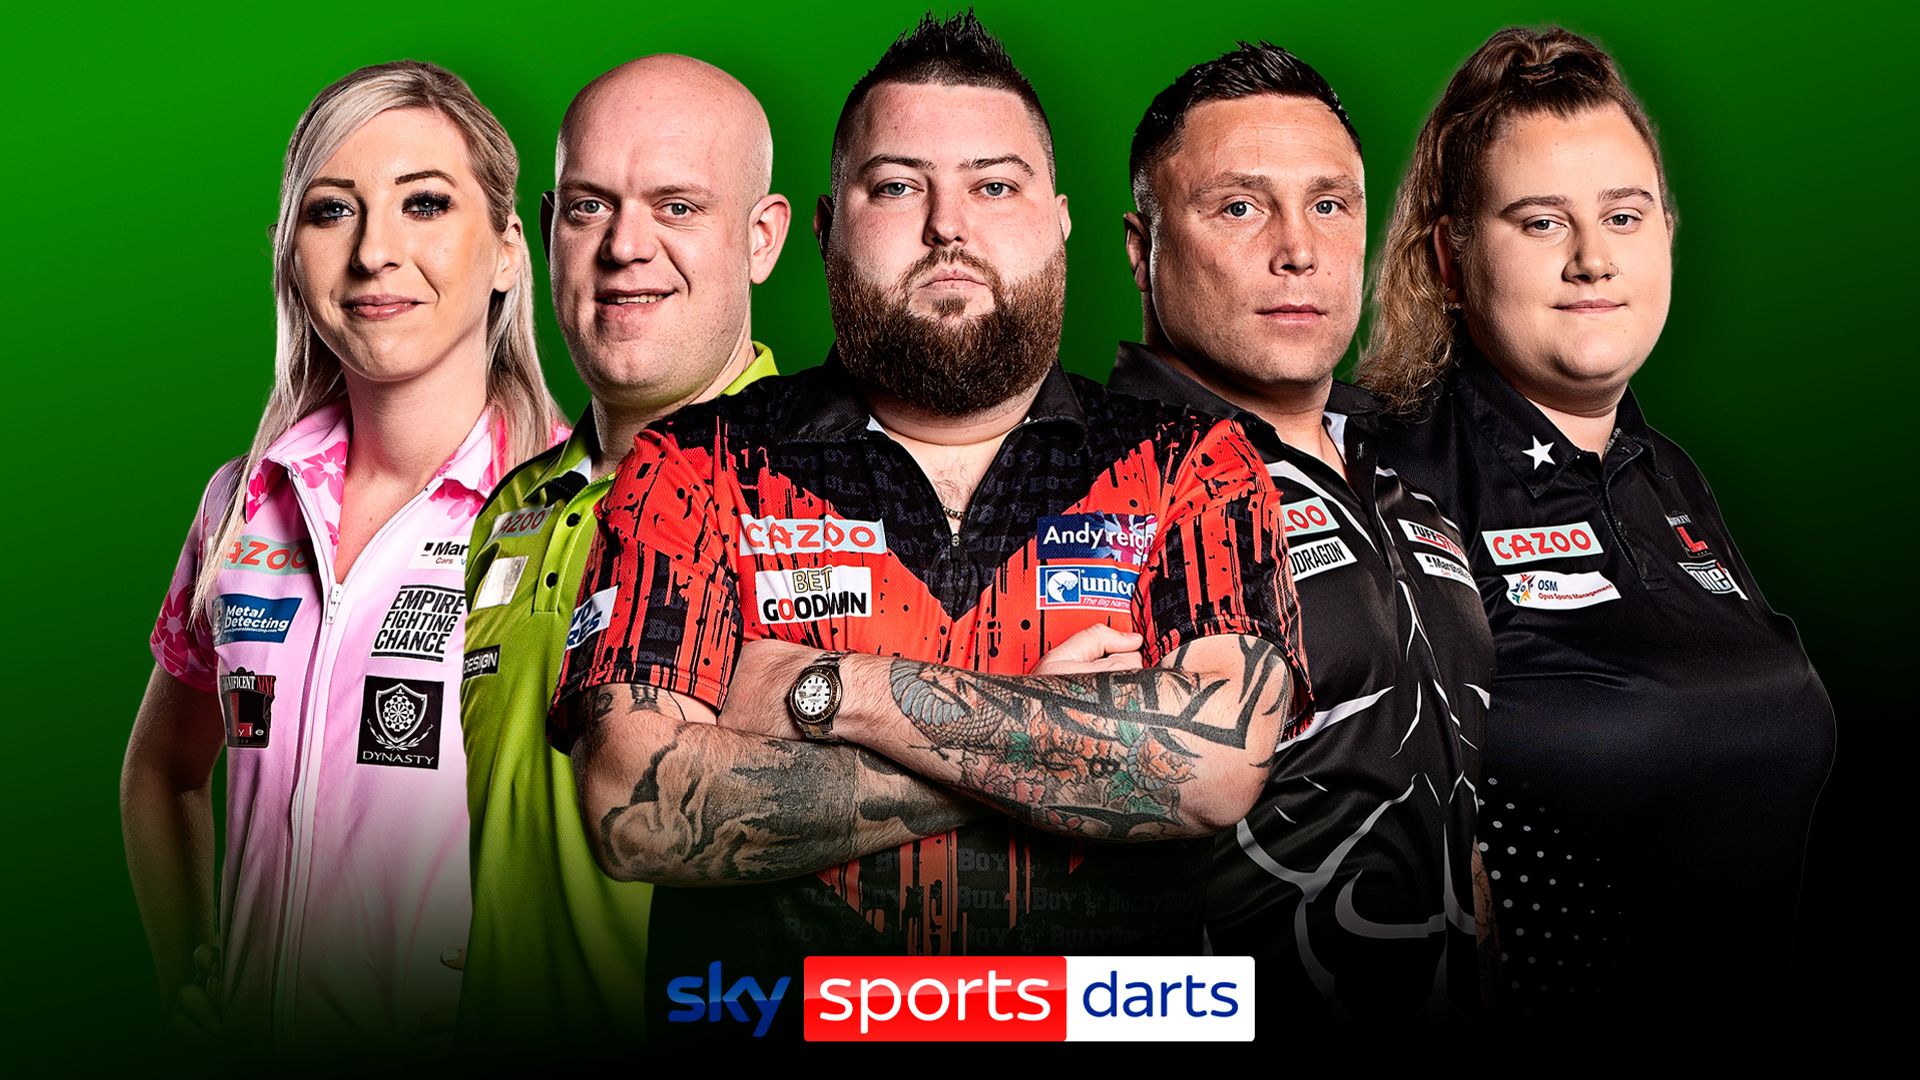 Grand Slam of Darts: Price, Rock, Anderson, & Smith in action LIVE!